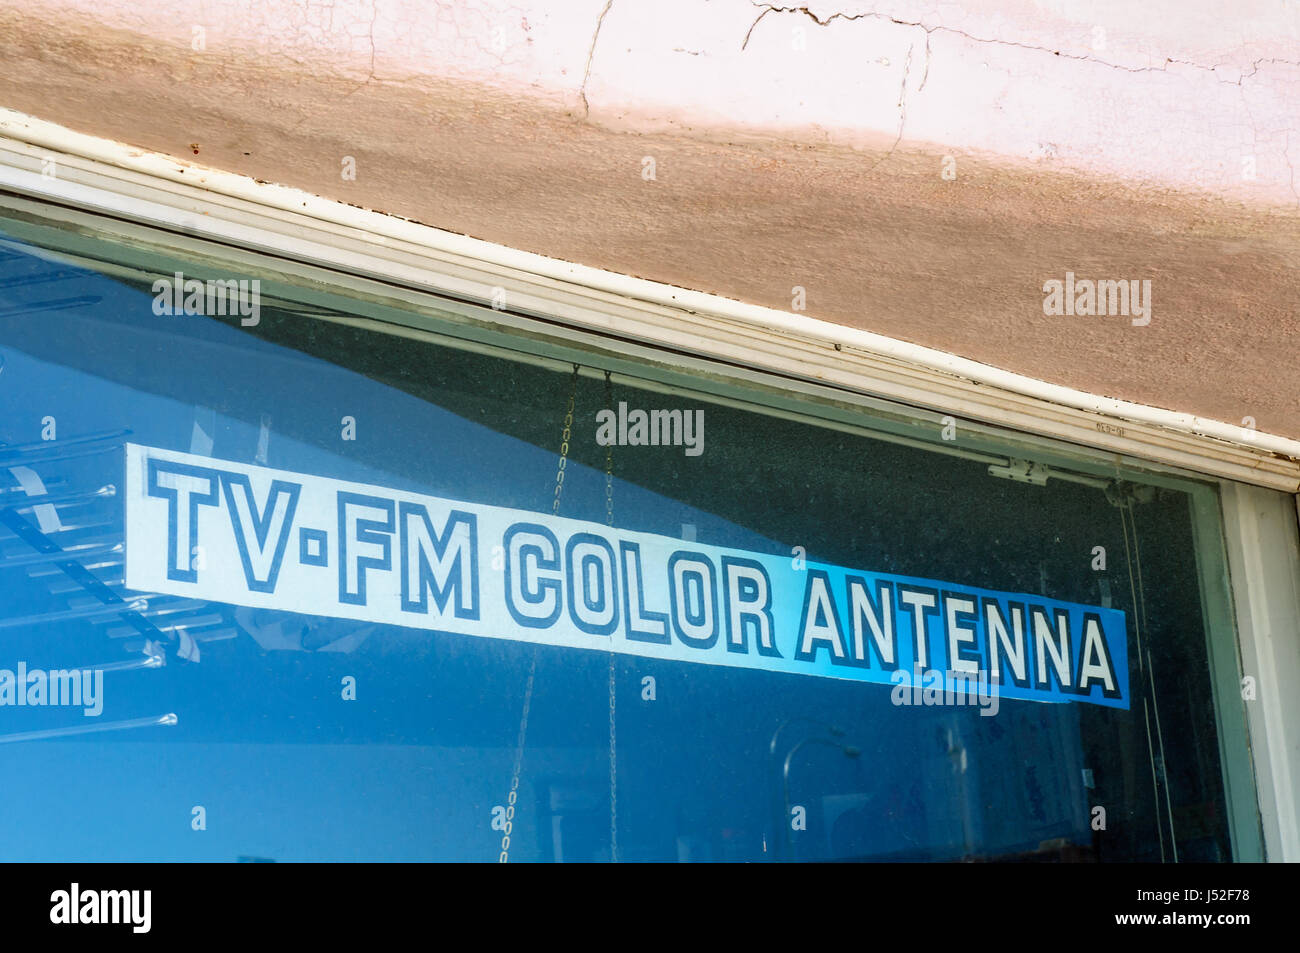 Sign advertising TV-FM COLOR ANTENNA which looks to be in 80's font in a closed down business. Stock Photo